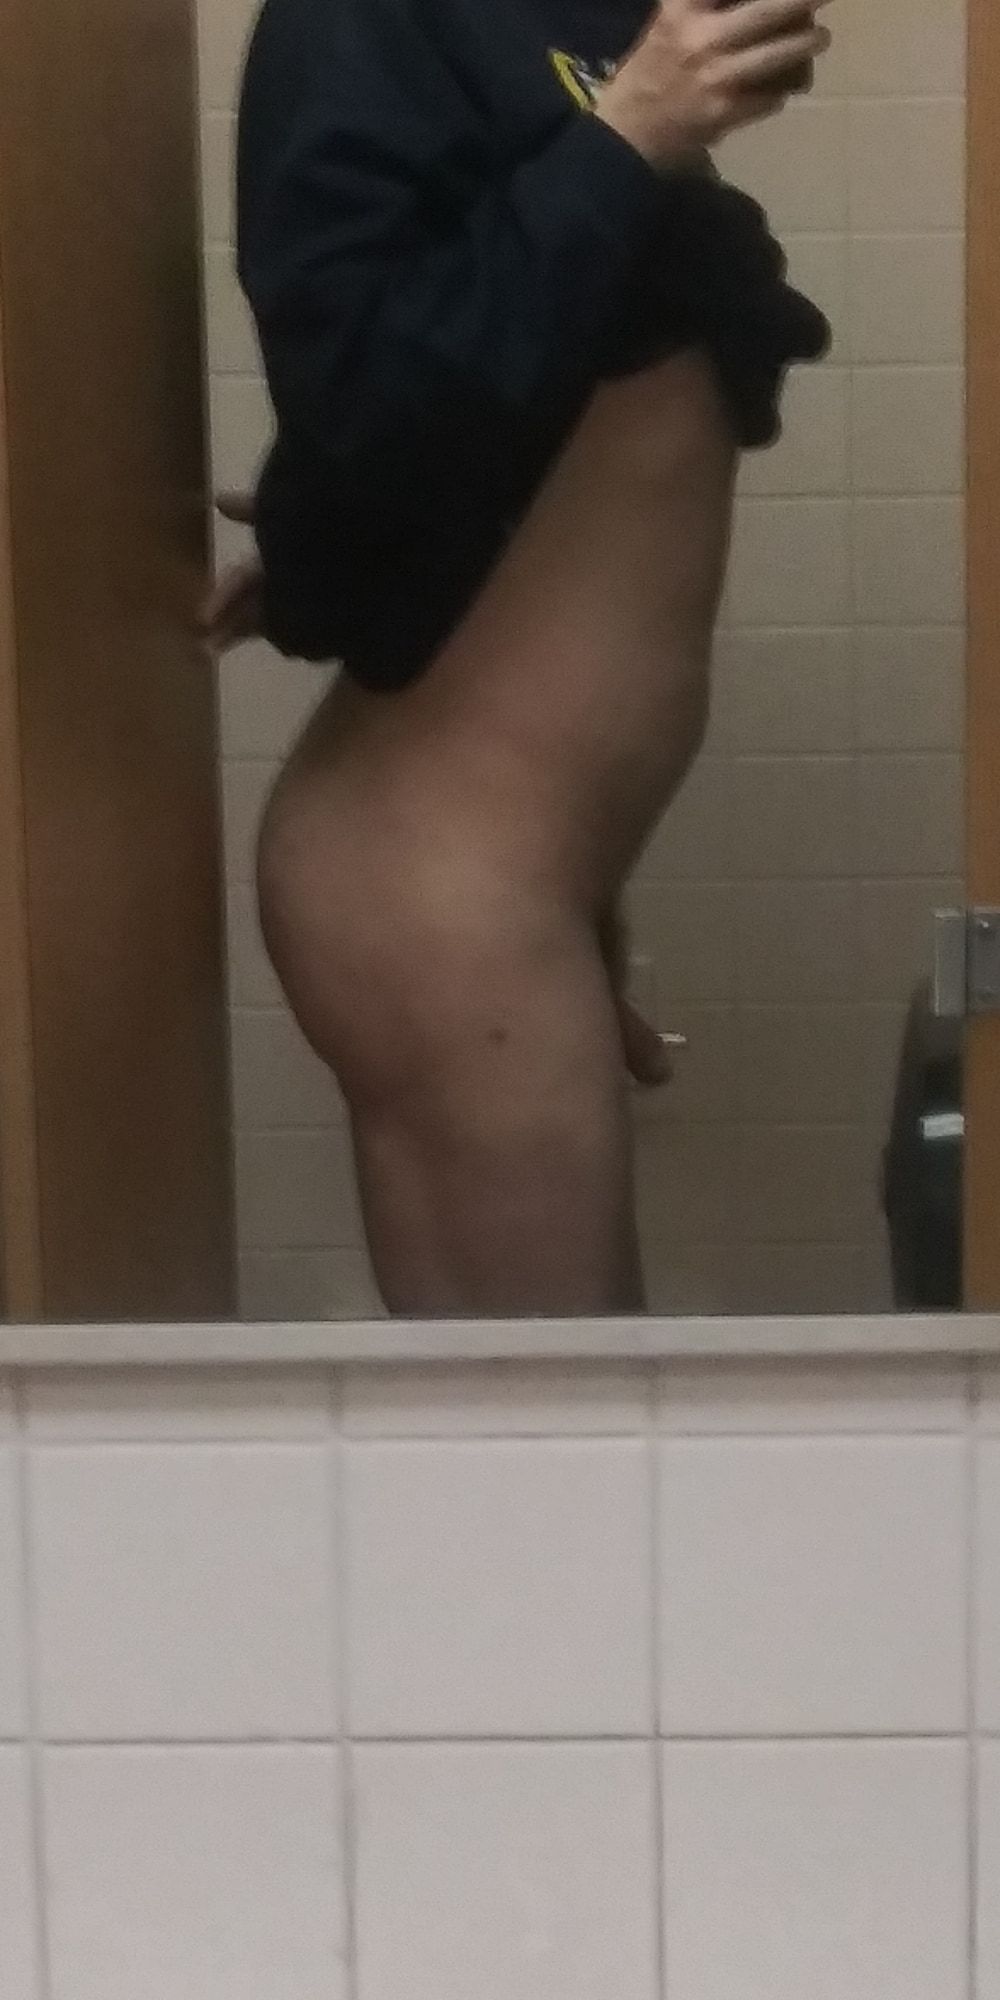 My ass and cock #2